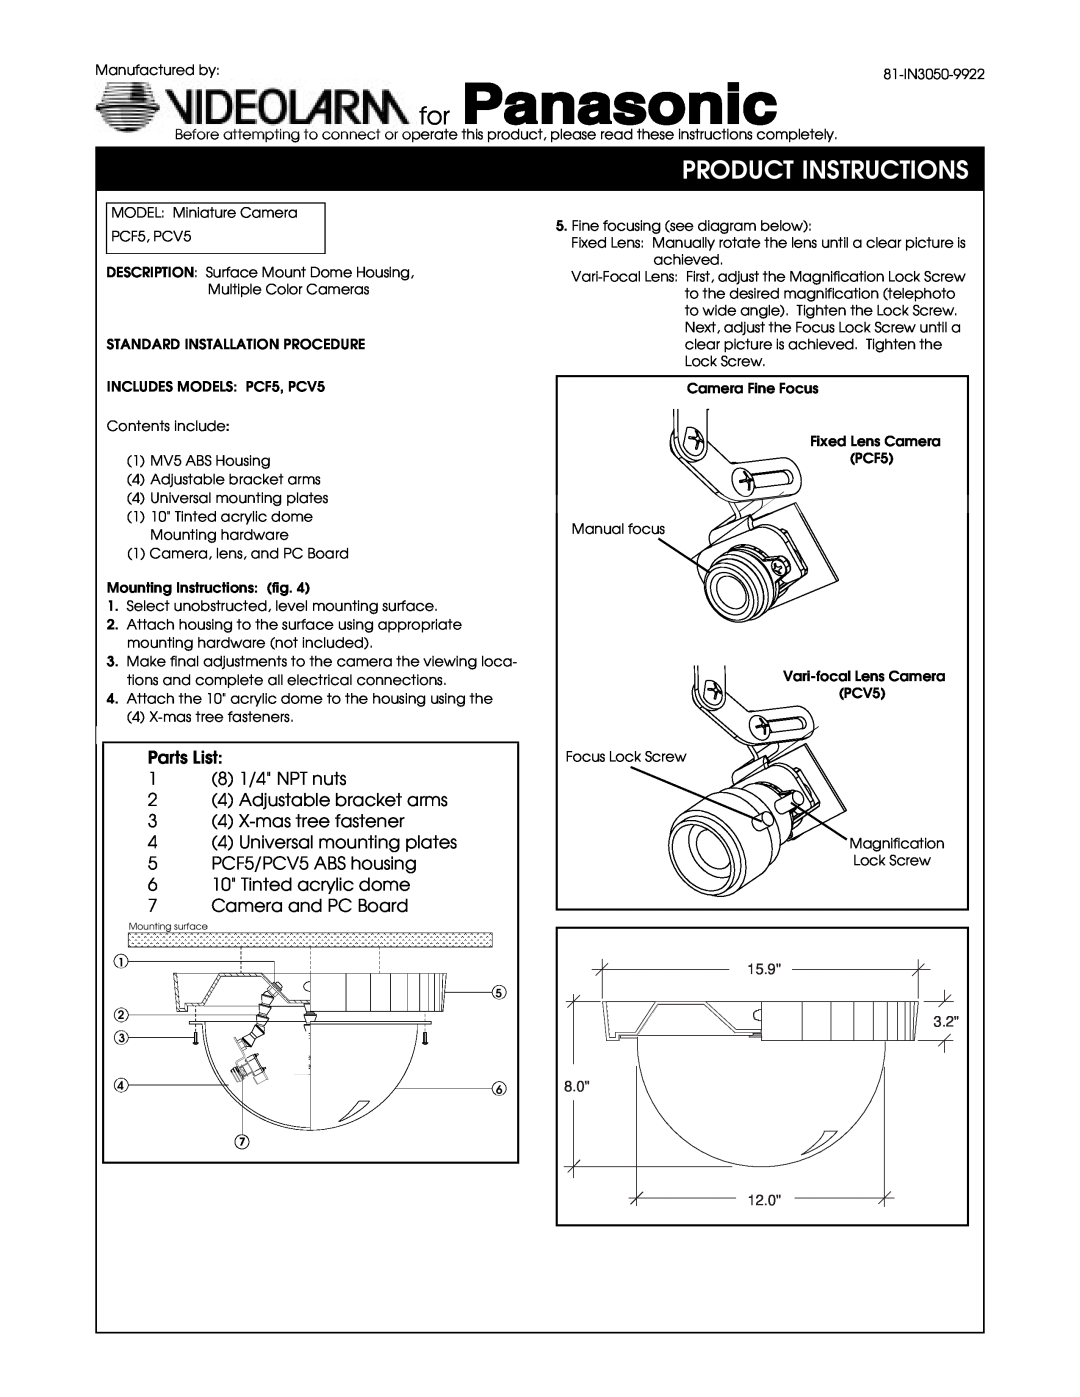 Panasonic PCF5 manual Product Instructions, Parts List 1 8 1/4 NPT nuts 2 4 Adjustable bracket arms, Camera and PC Board 